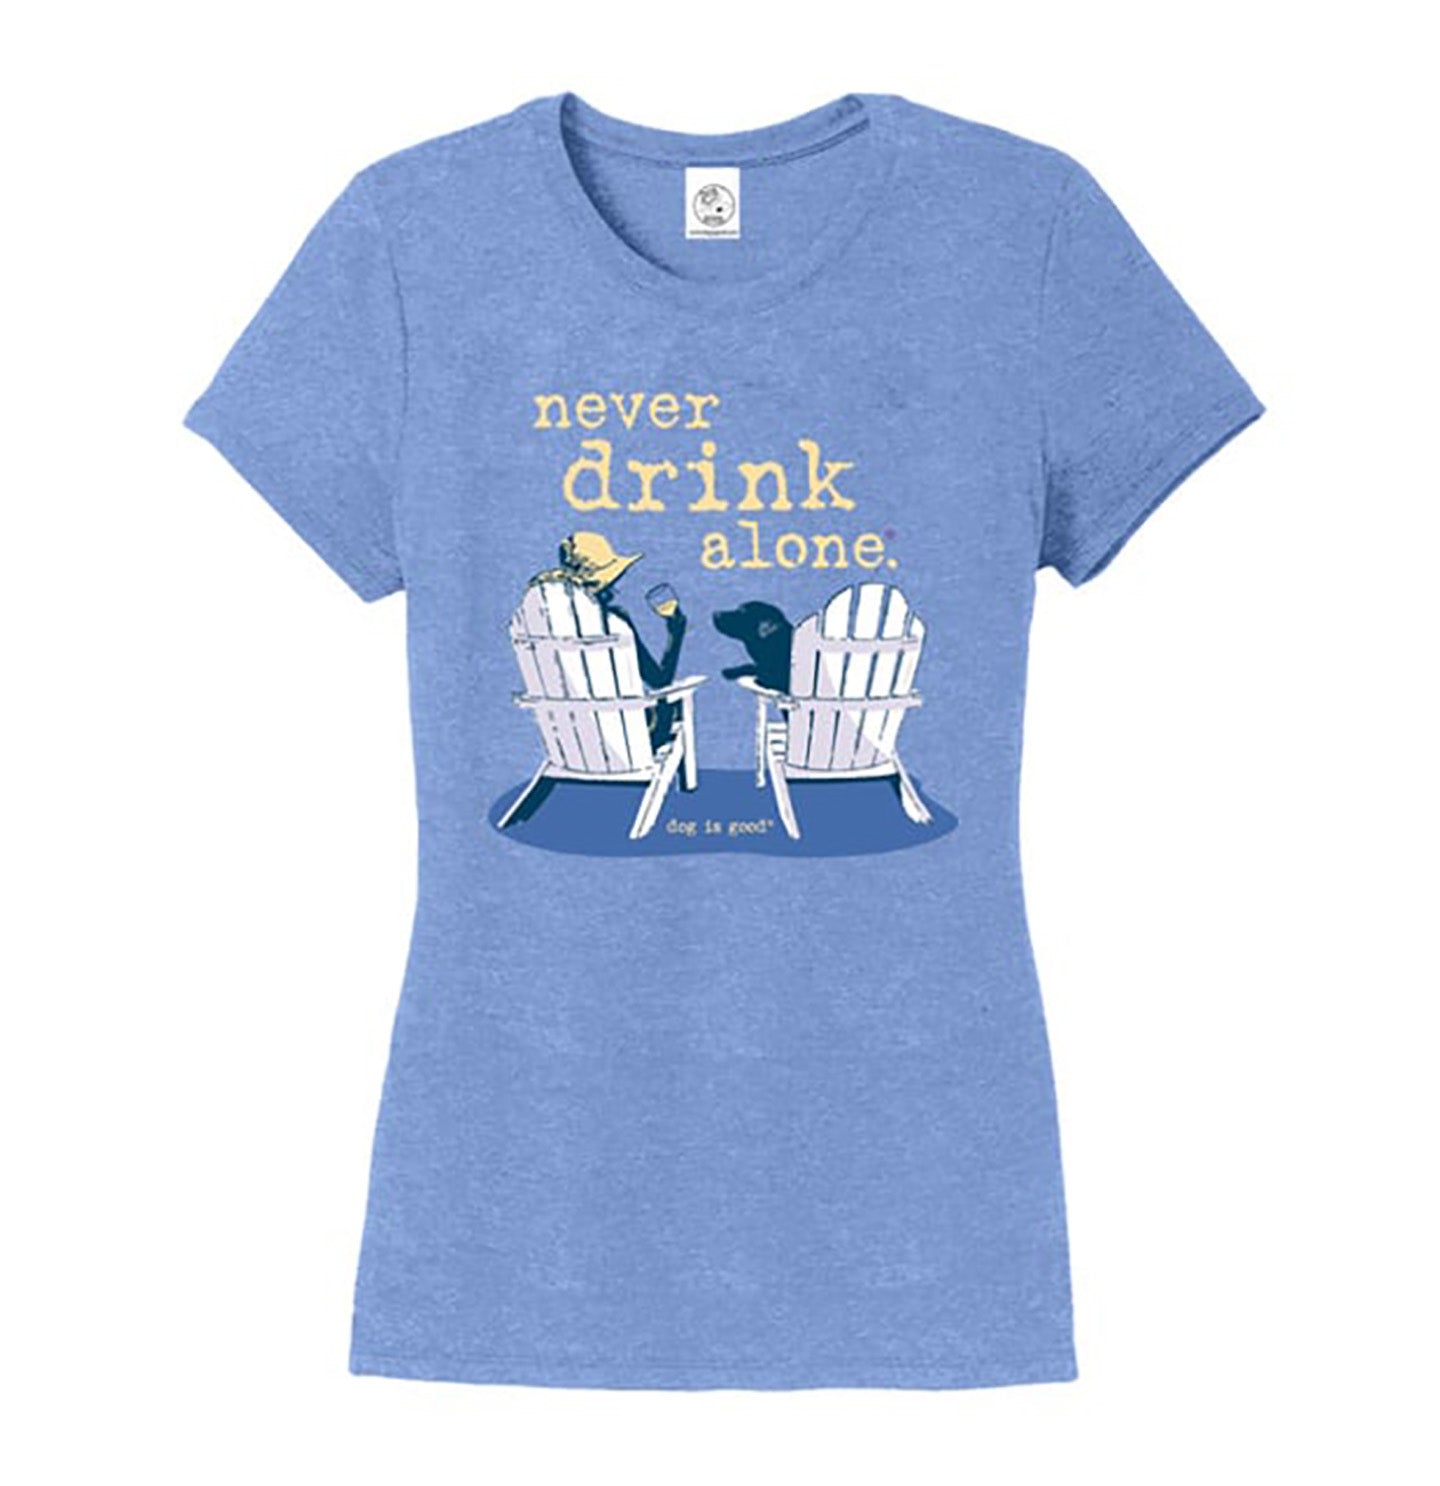 Dog Is Good - Never Drink Alone - Women's T-Shirt